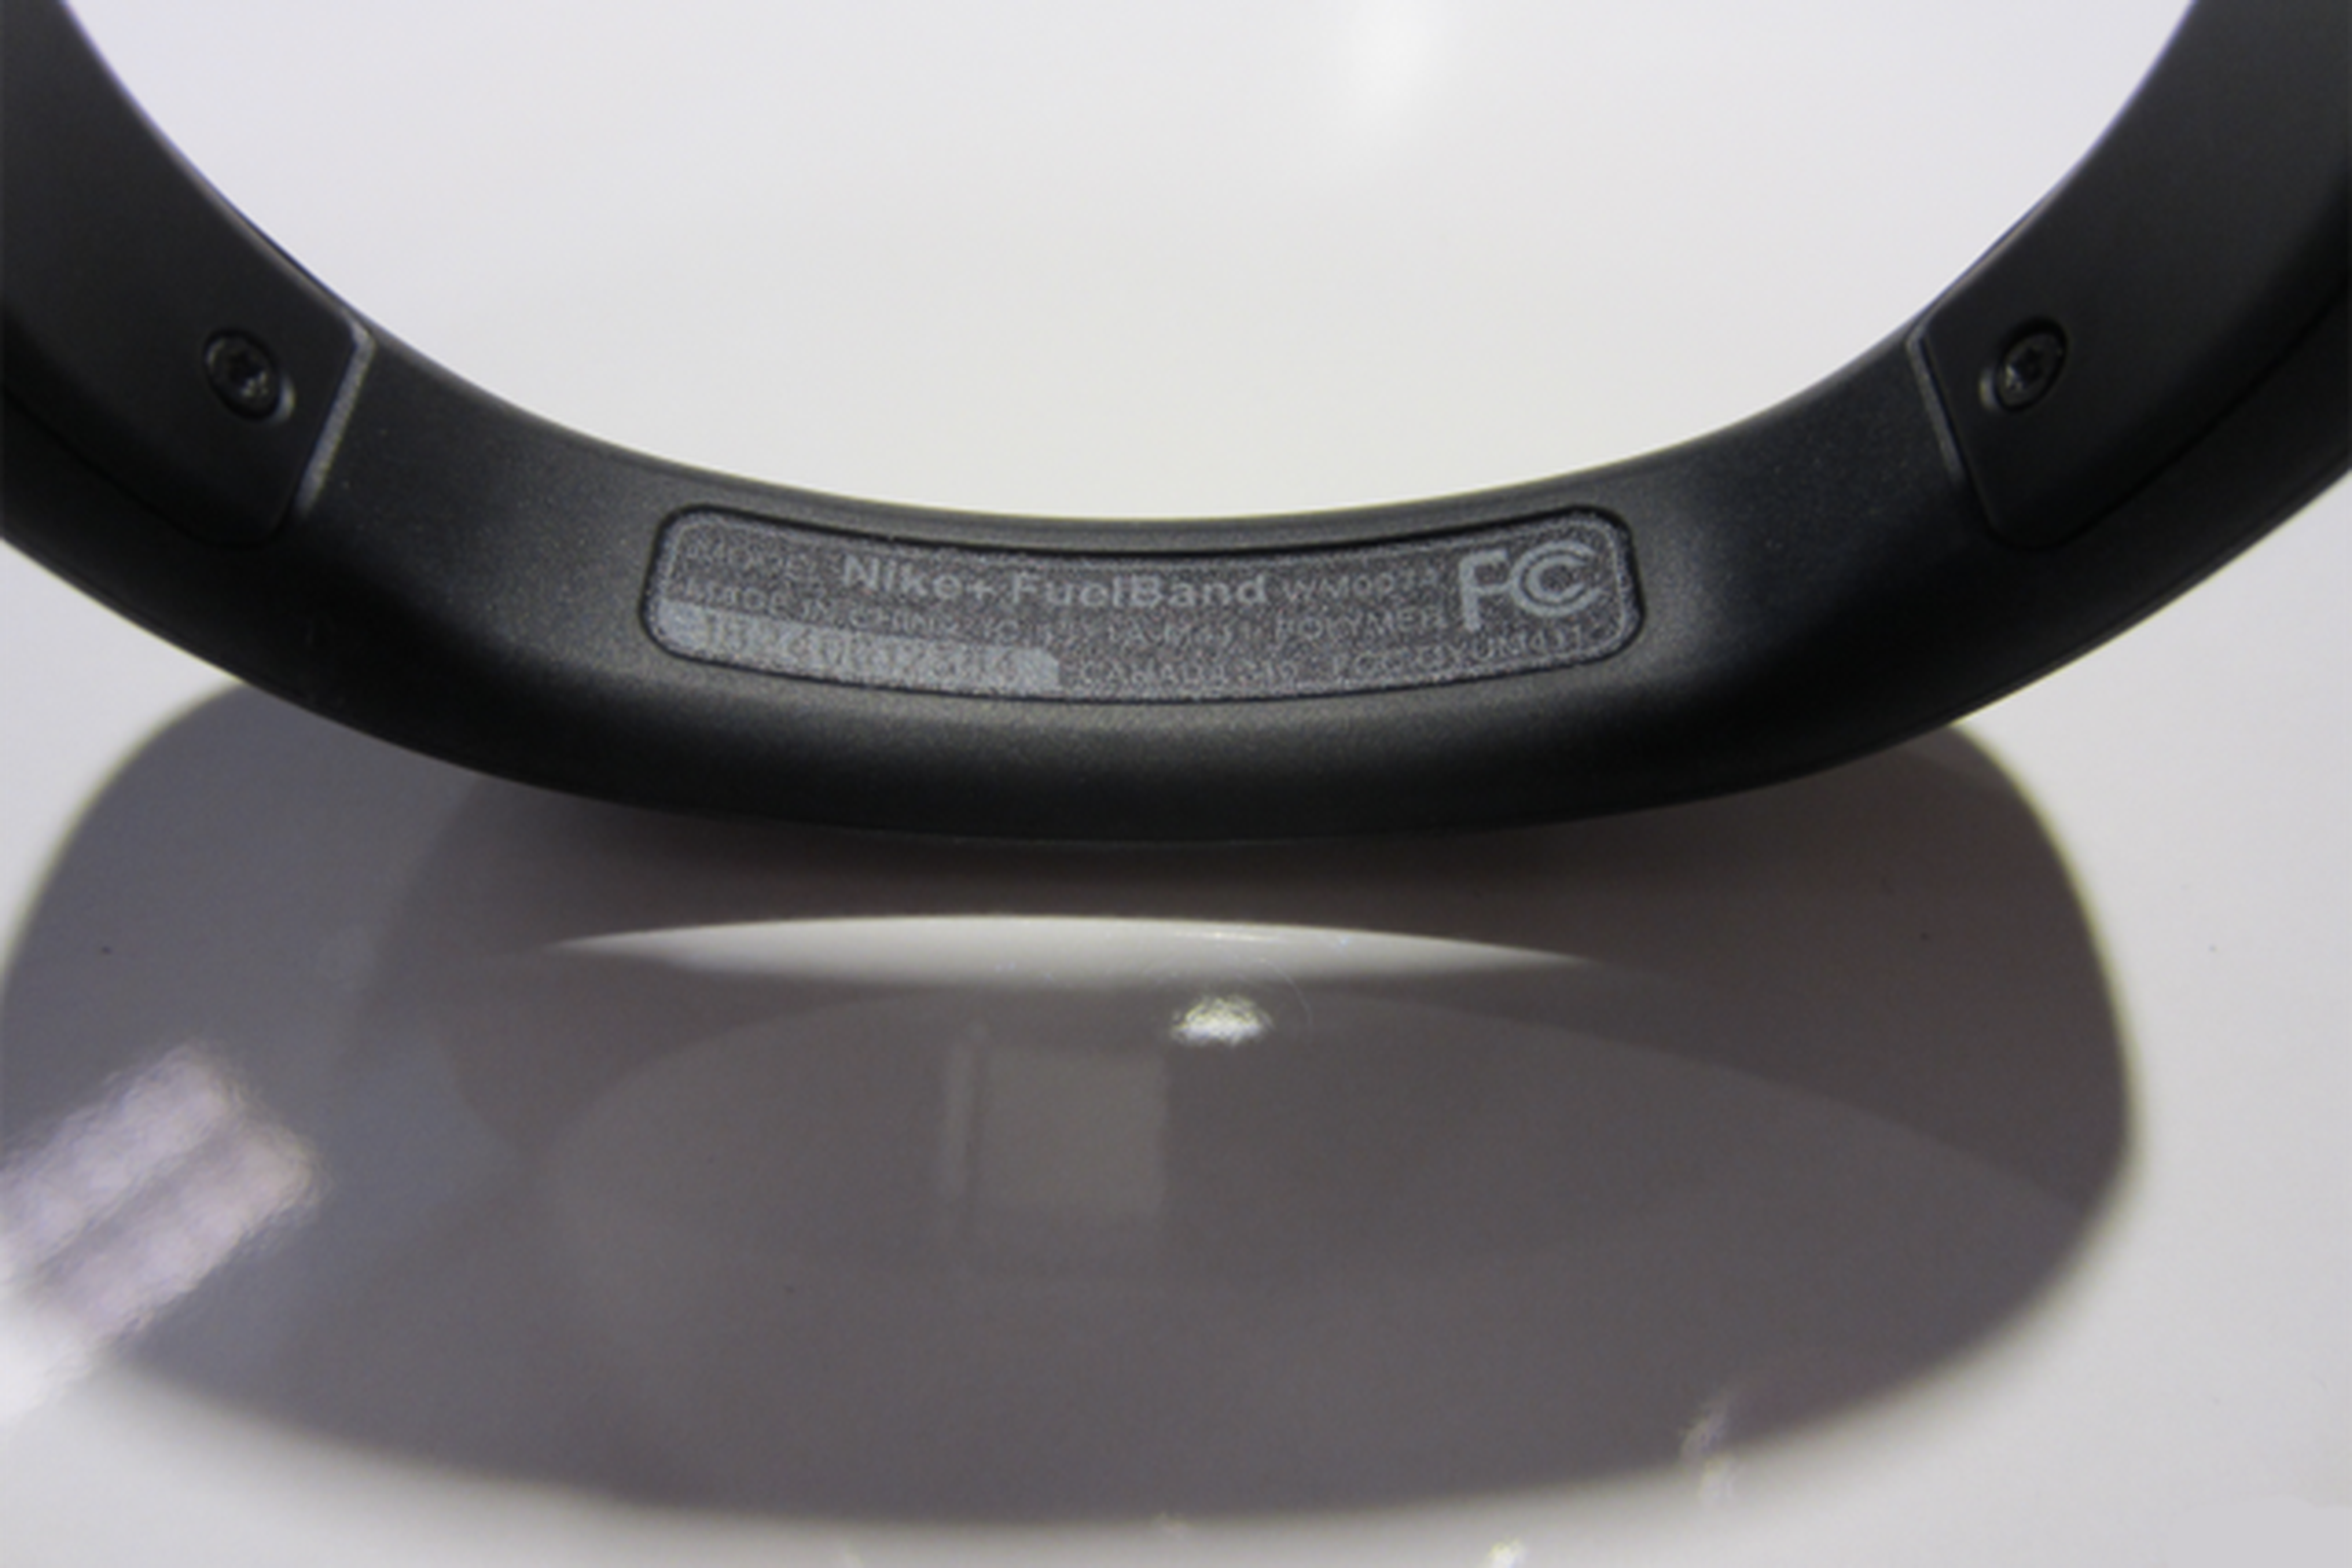 Nike+ FuelBand FCC Label